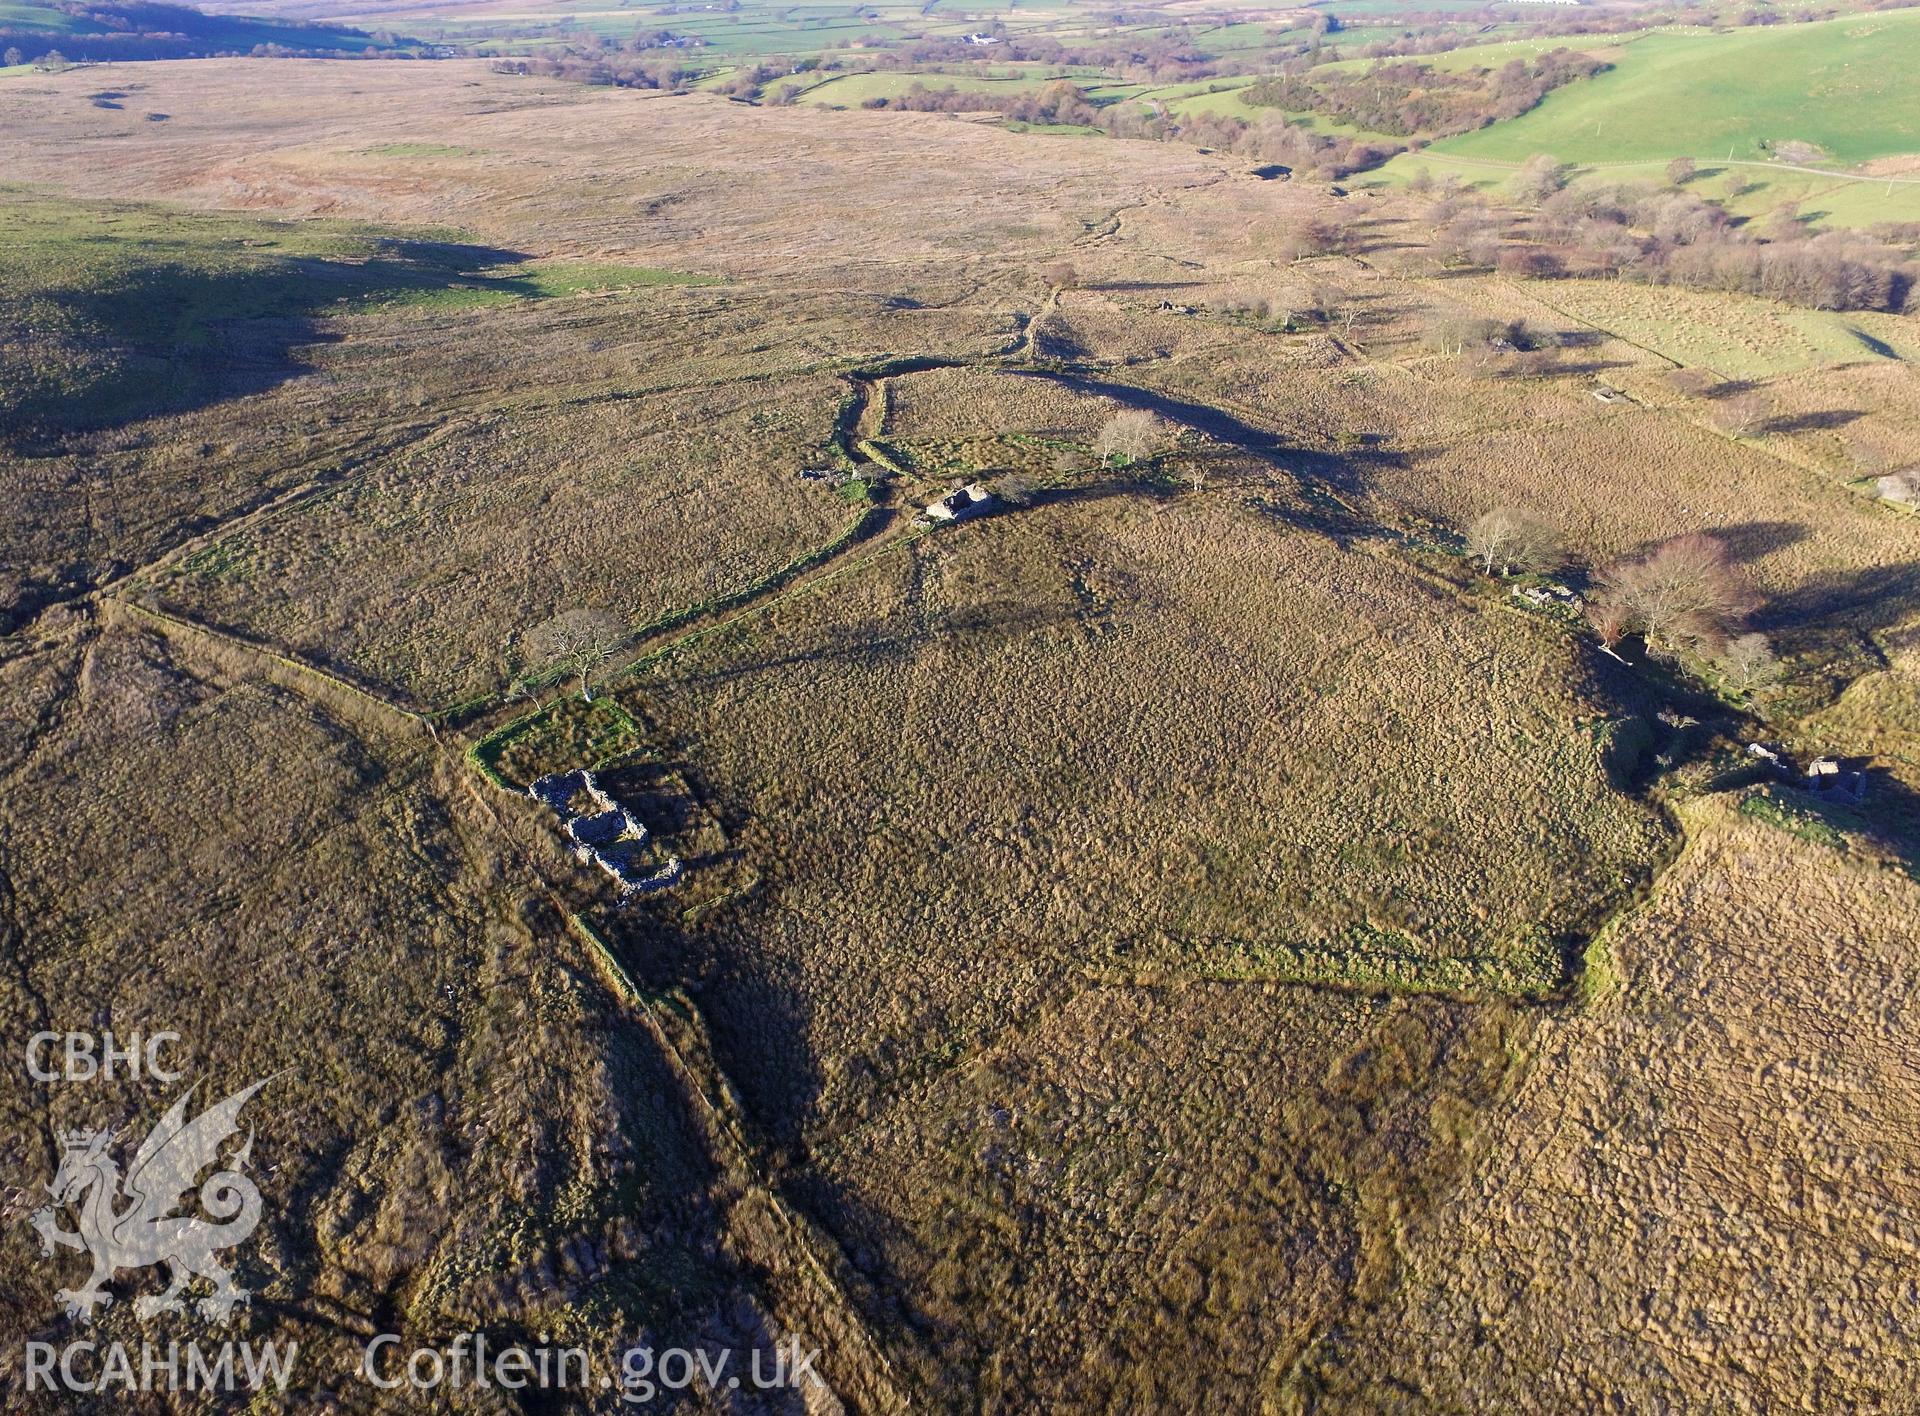 Aerial view of the ruined Ty-Newydd and its outbuilding; Gwndwn-Gwynau-Isa cottage and Cil-y-Bryn house and outbuilding, south west of Bryneithinog farm, Ystrad Fflur. Colour photograph taken by Paul R. Davis on 18th November 2018.